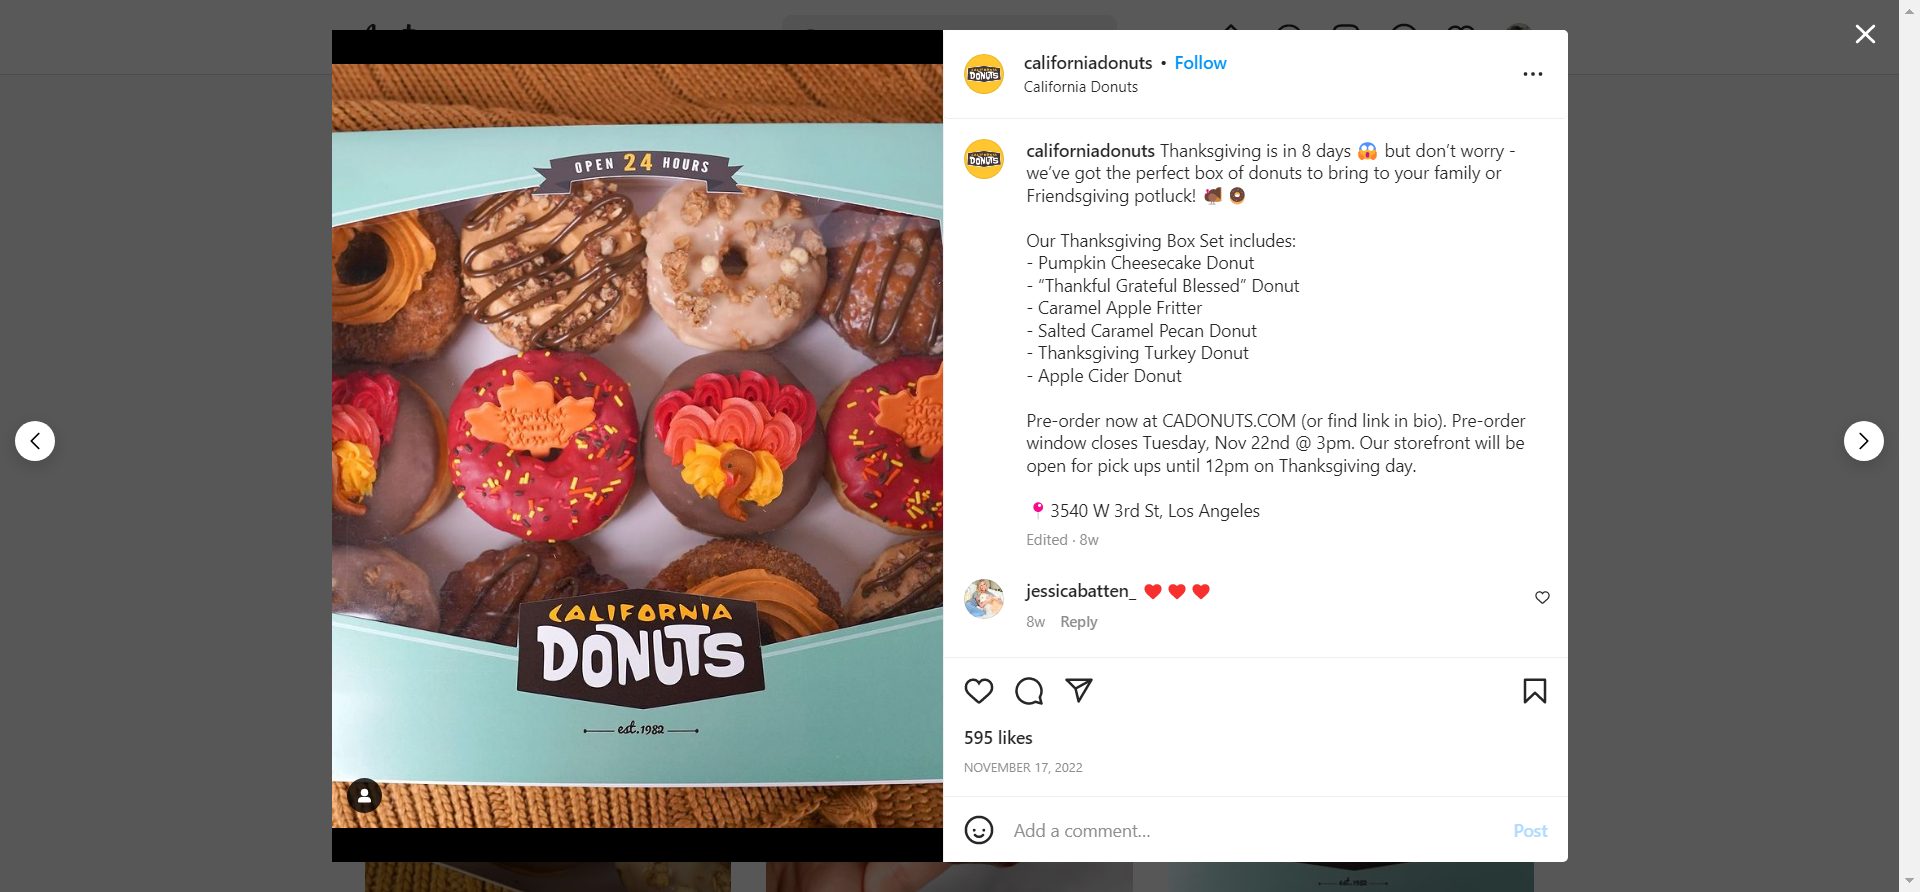 60 Proven Restaurant Promotion Ideas That Work in 2023